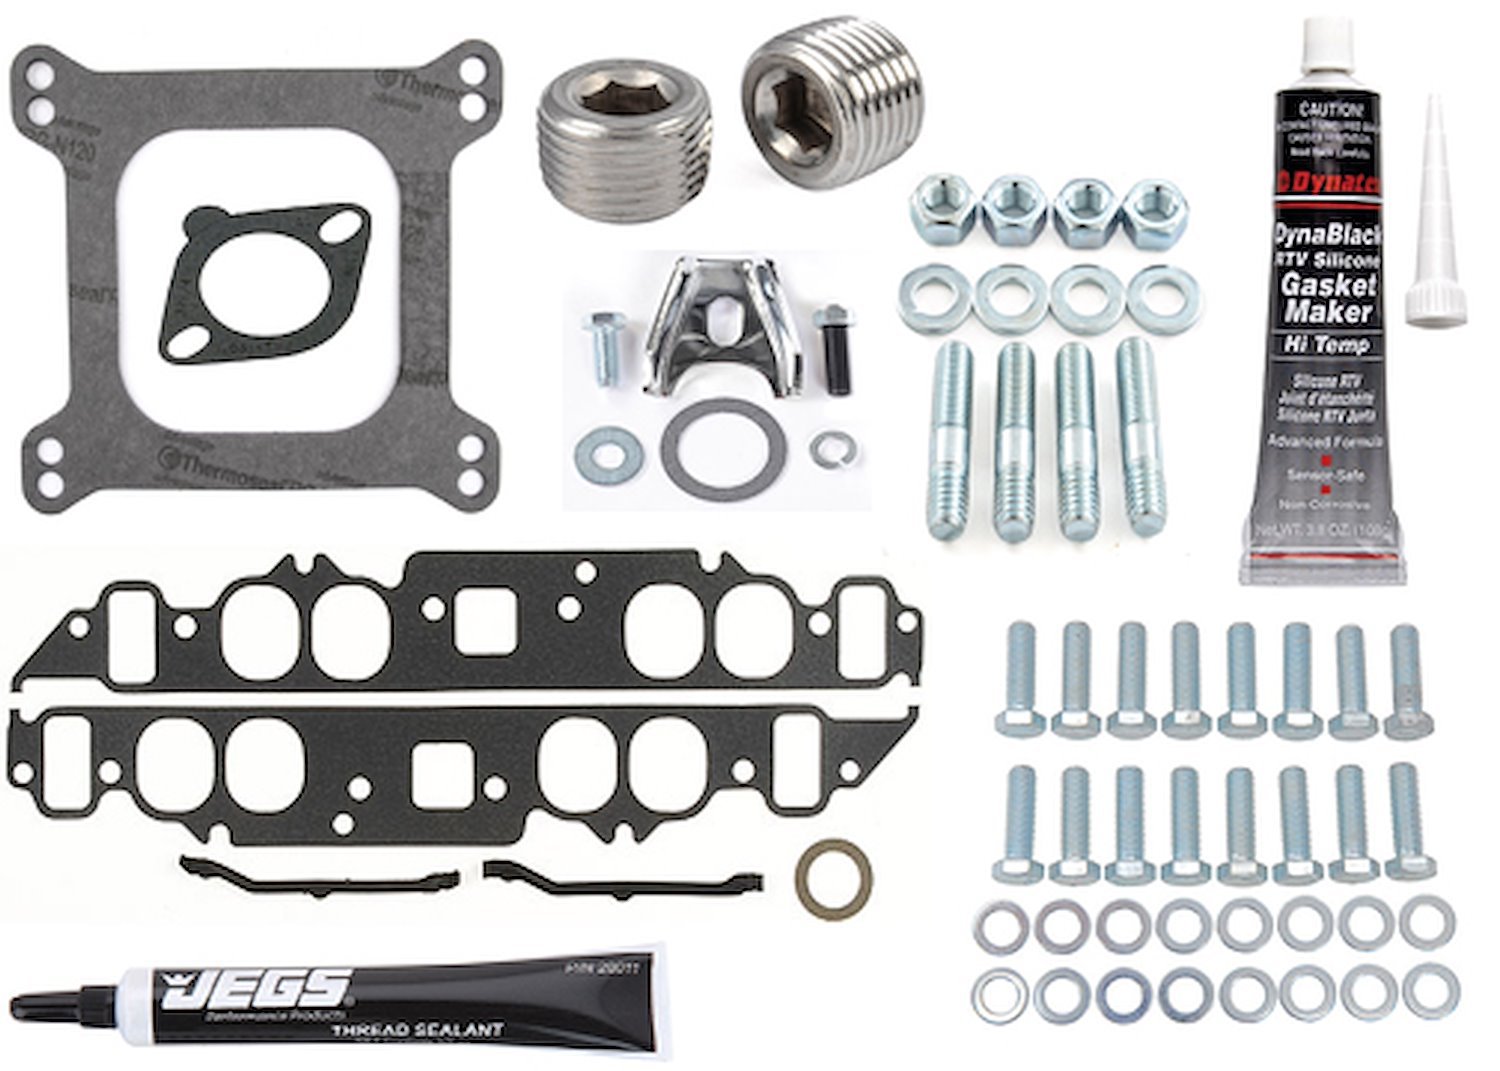 Intake Manifold Installation Kit for Big Block Chevy Oval